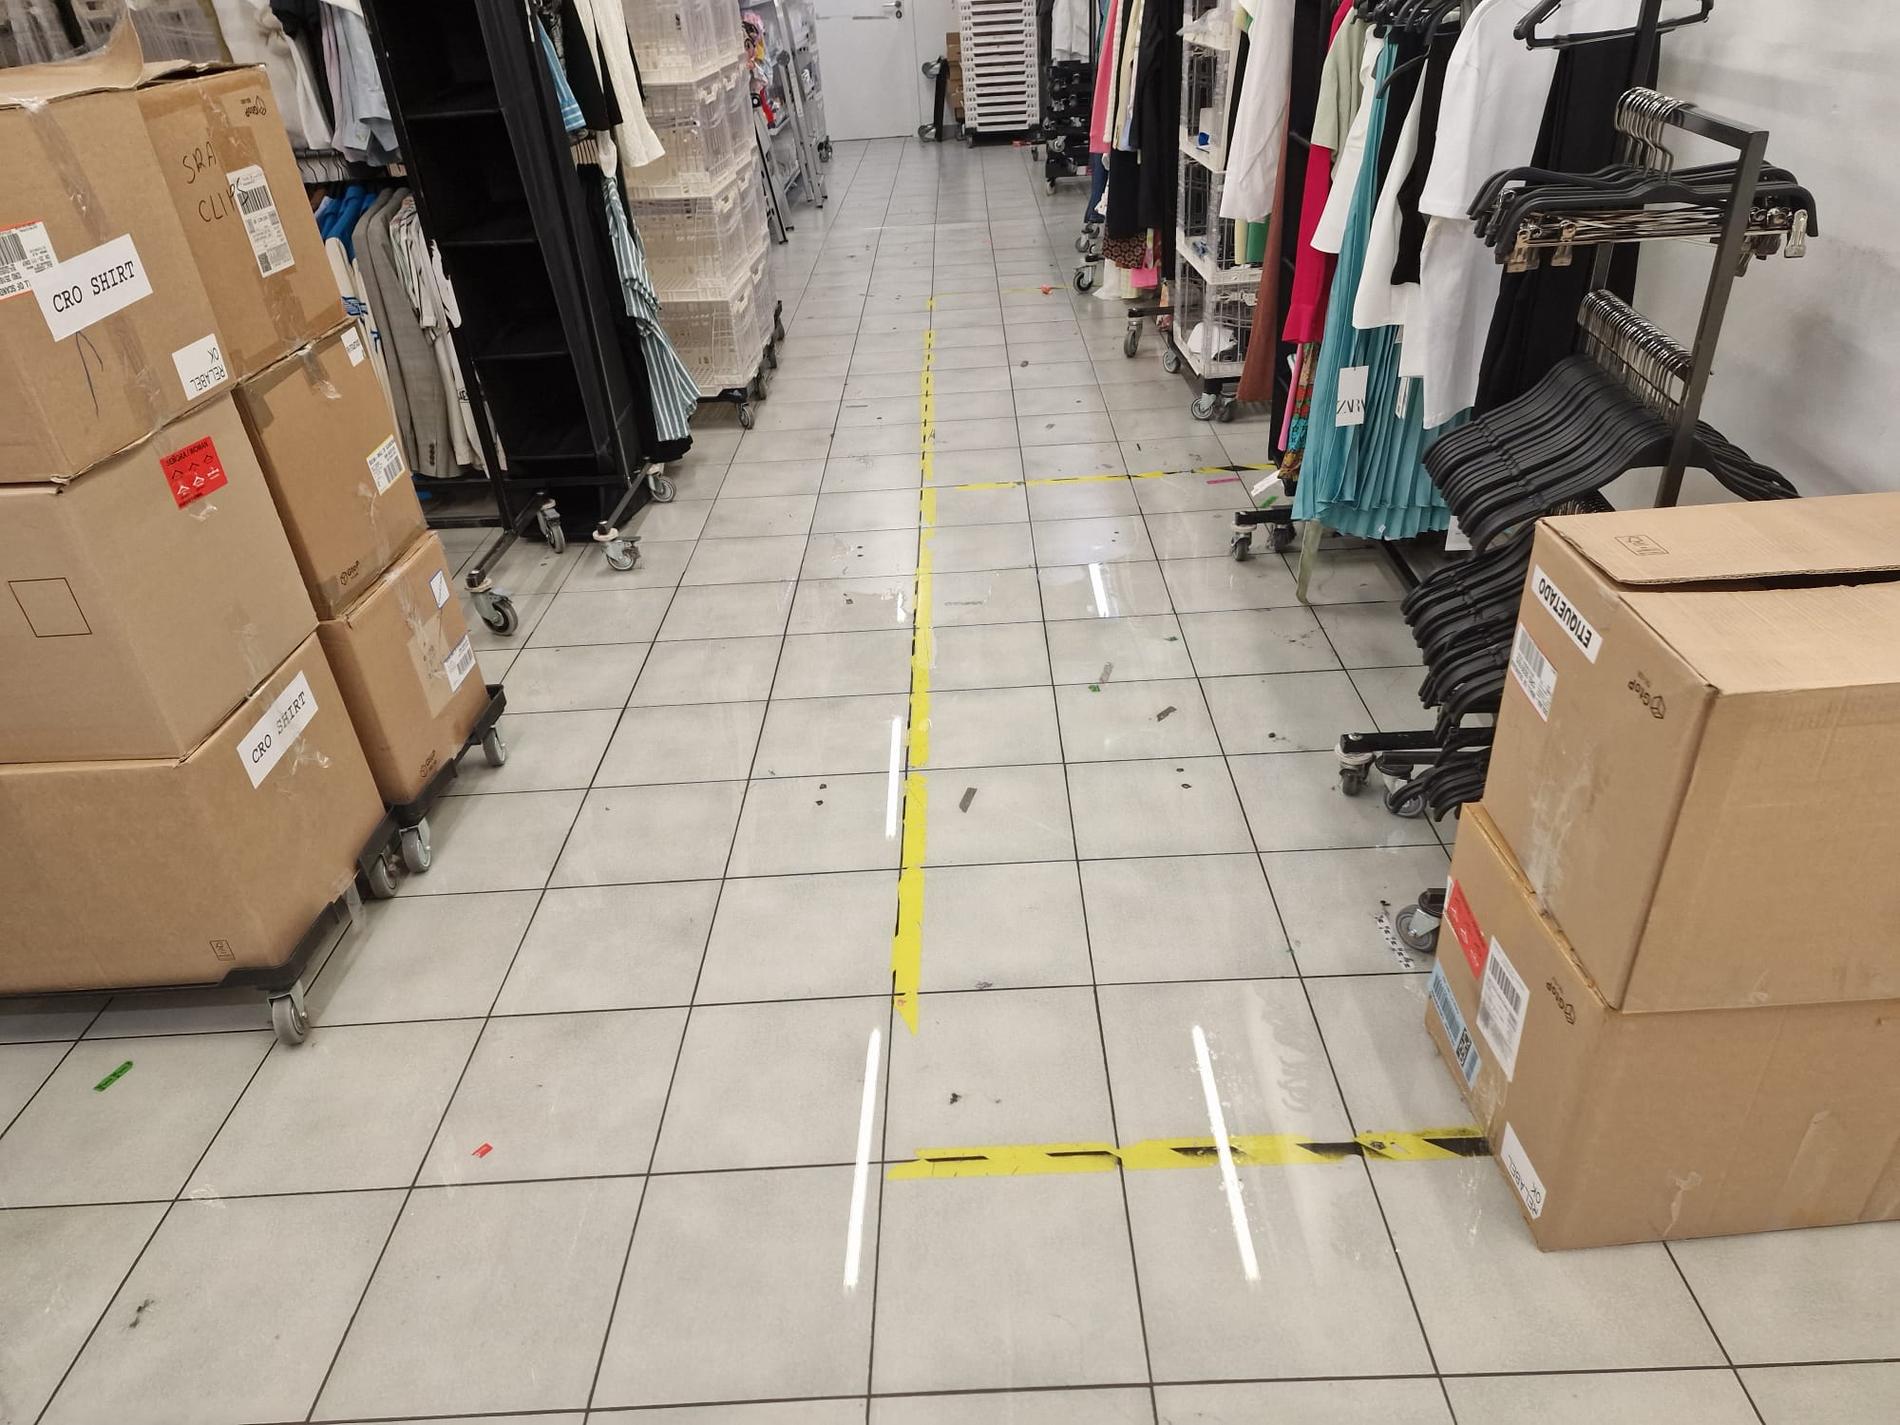 In these kind of taped areas, tables were set up when goods were to be unpacked. "The manager talked to me as if I were an idiot, saying 'here you stand, you only move your upper body, not your legs, otherwise it takes too long,'" says Una Subotic.